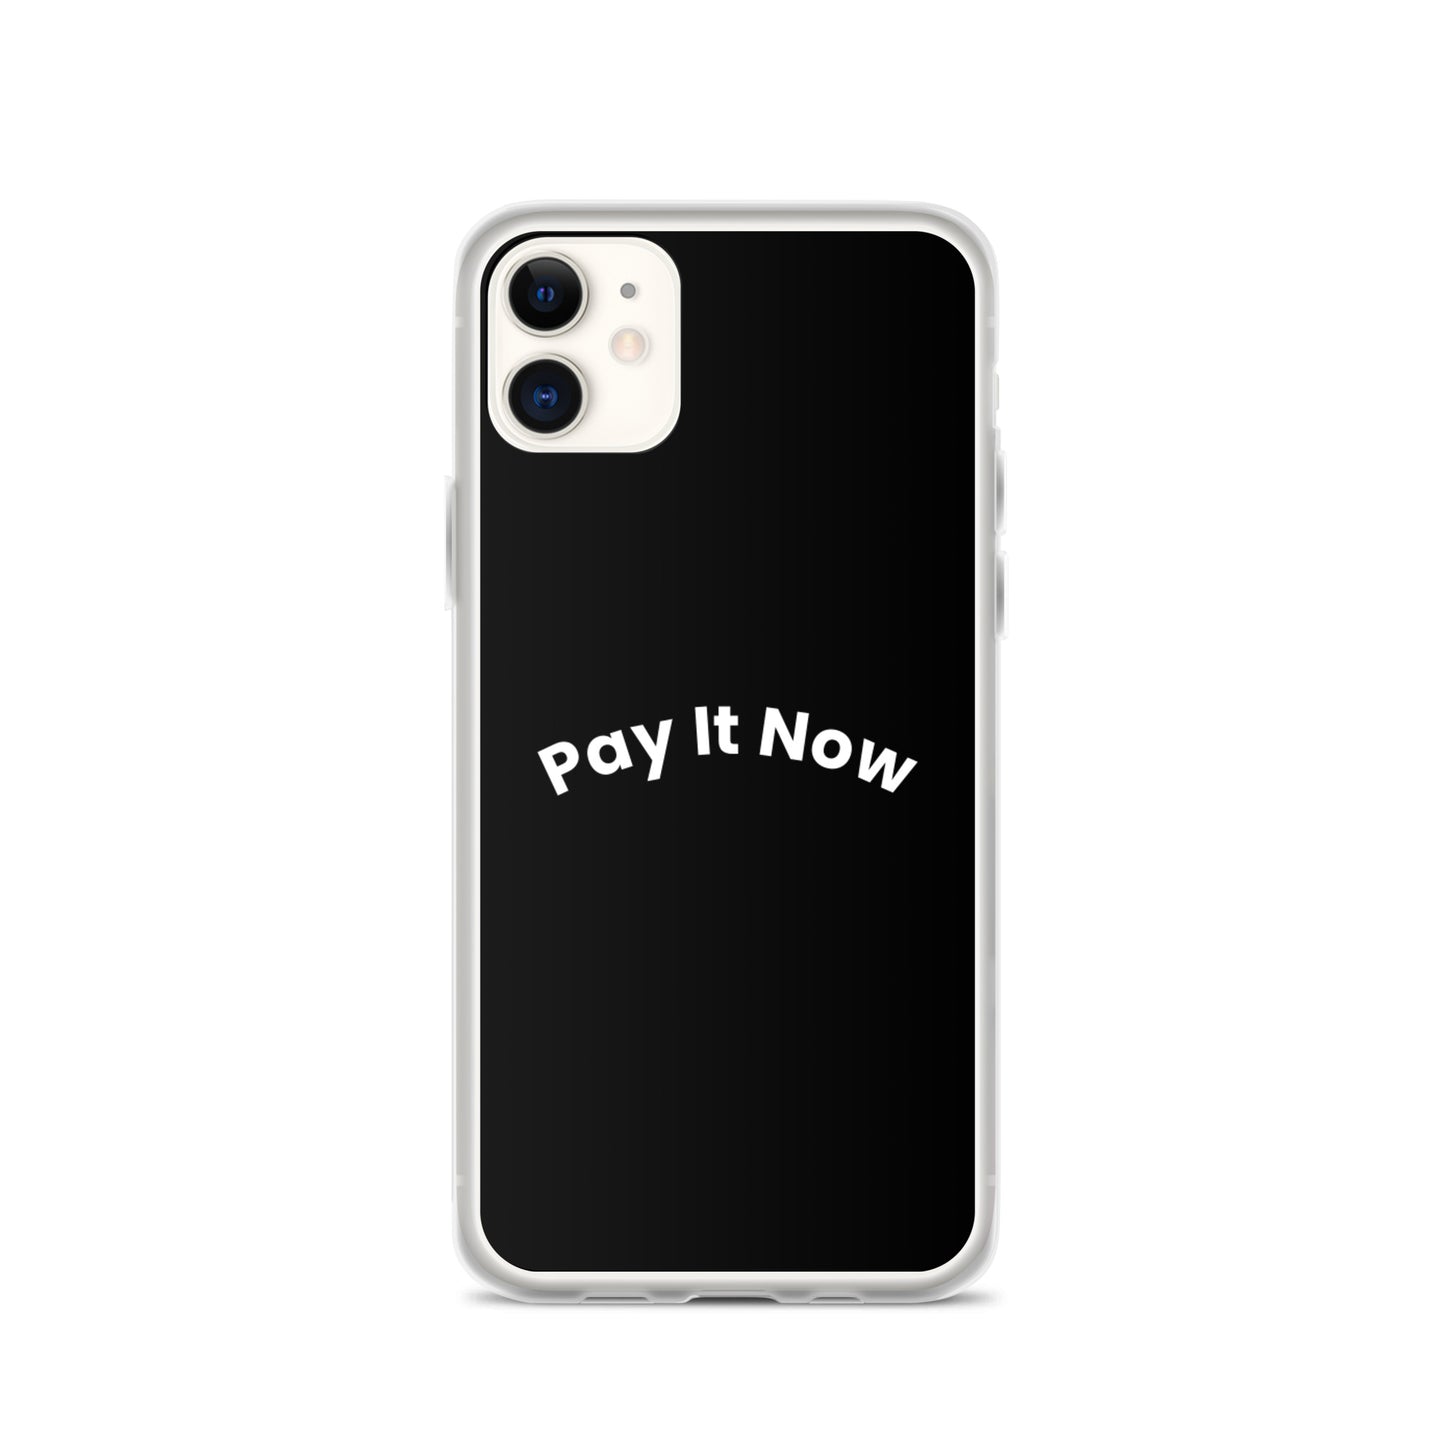 Pay It Now iPhone case